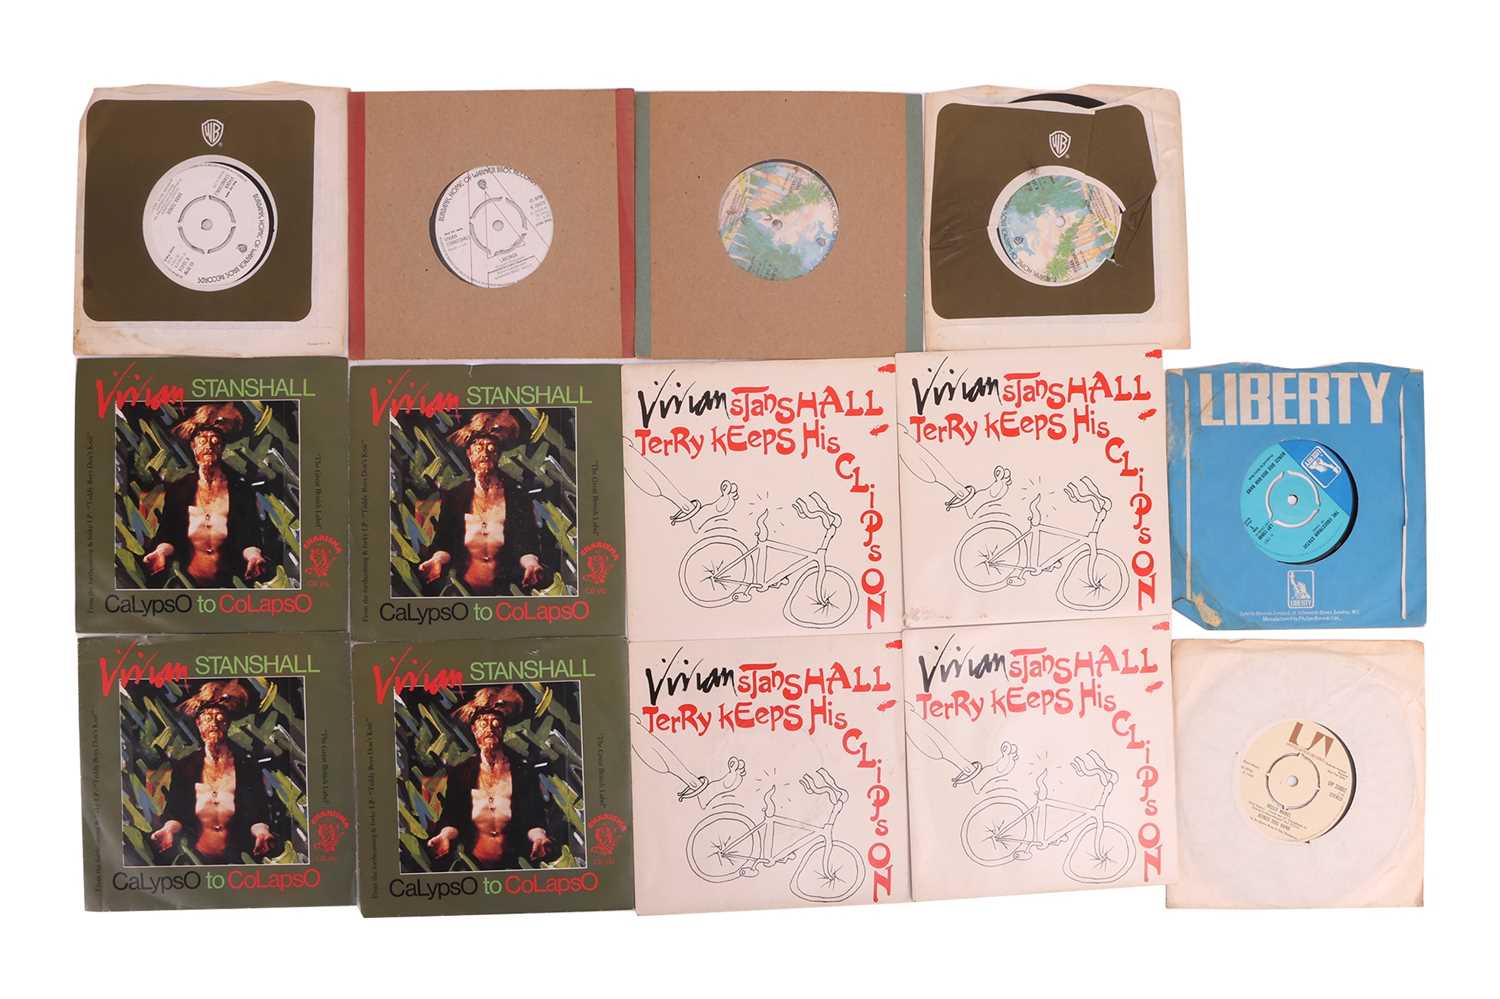 From the personal collection of Vivian Stanshall, a collection of 7" vinyl singles, comprising: Bonz